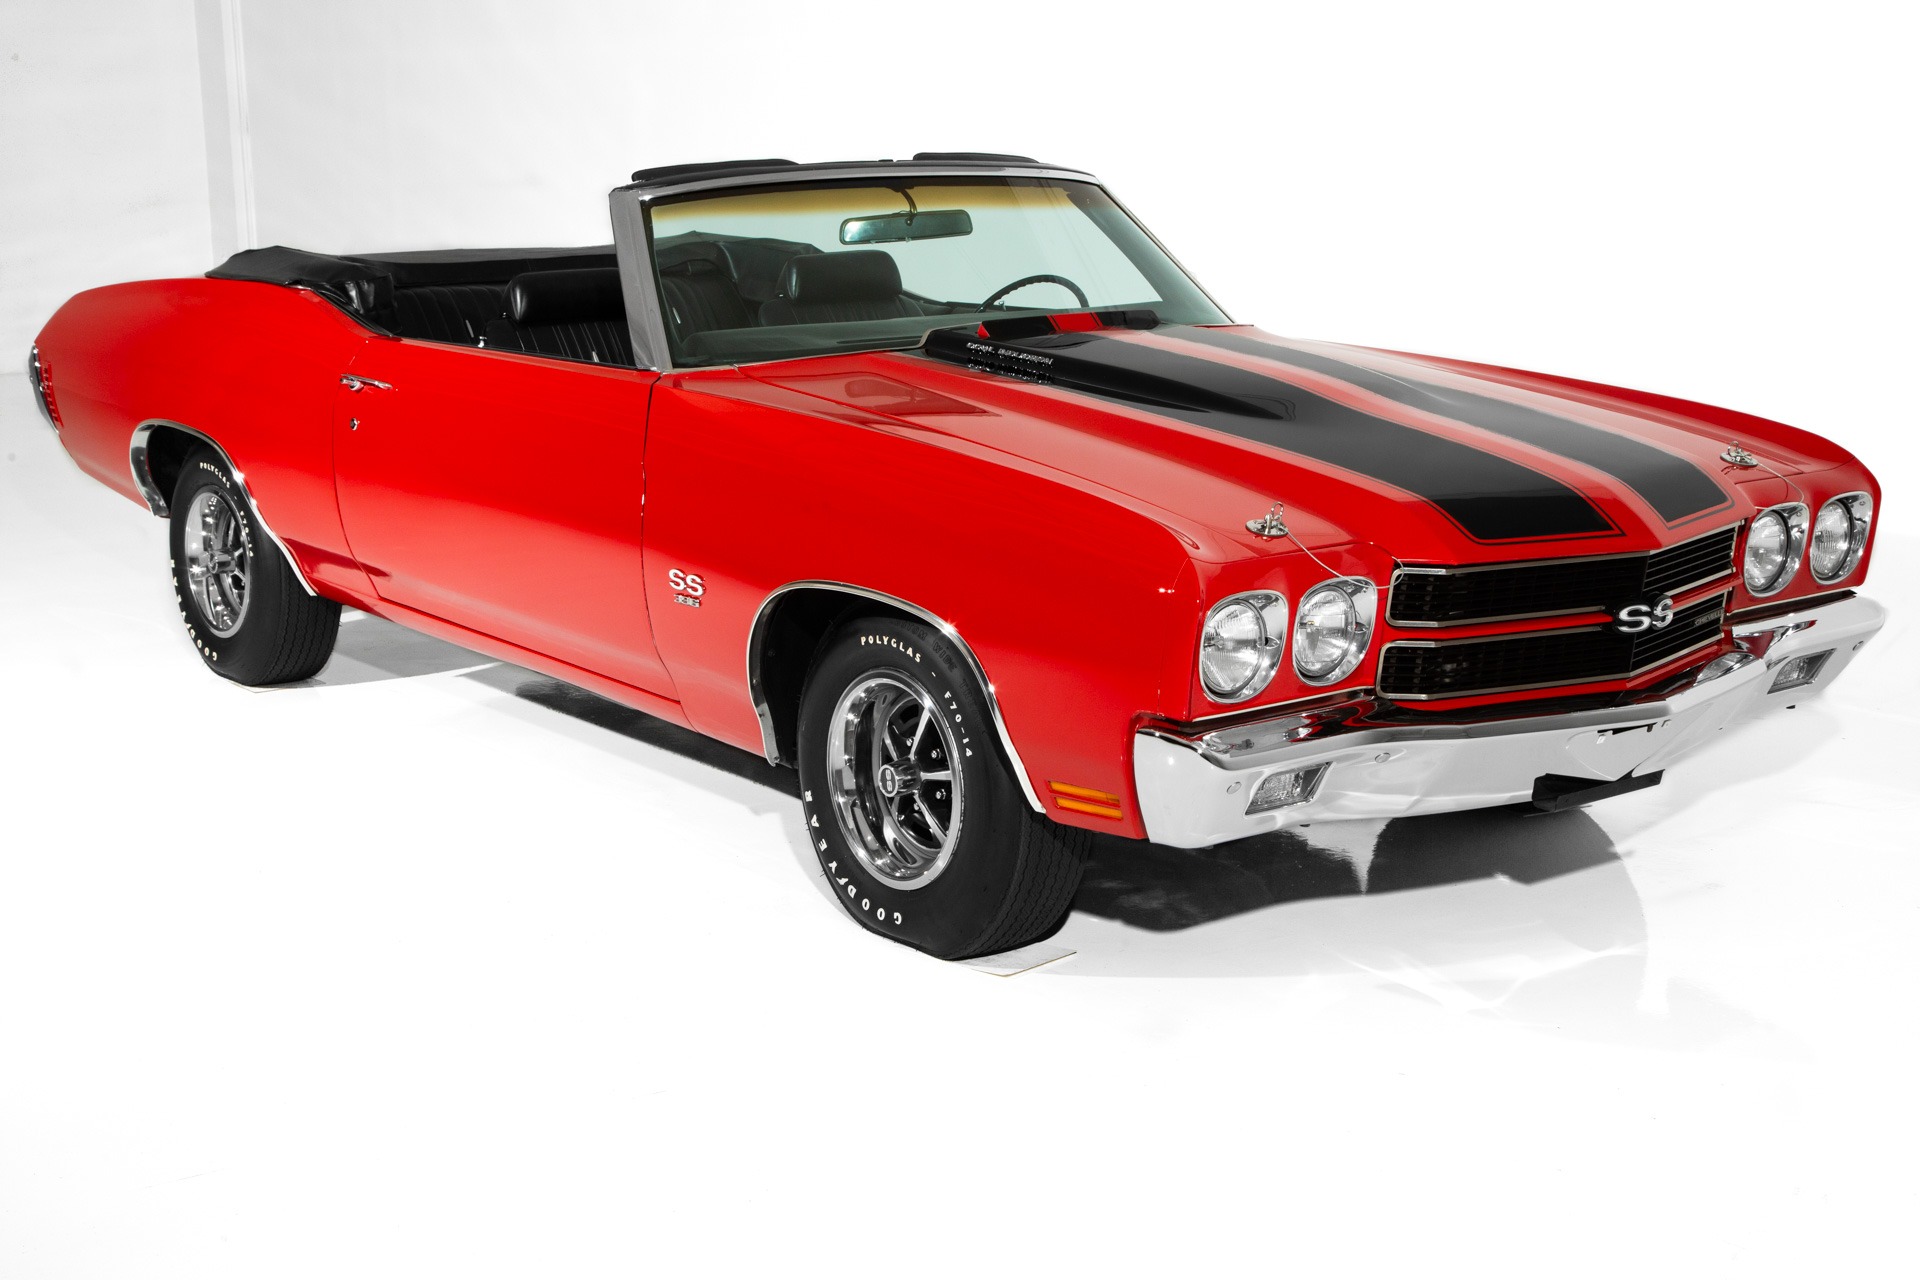 For Sale Used 1970 Chevrolet Chevelle Real SS  396 Build Sheet | American Dream Machines Des Moines IA 50309